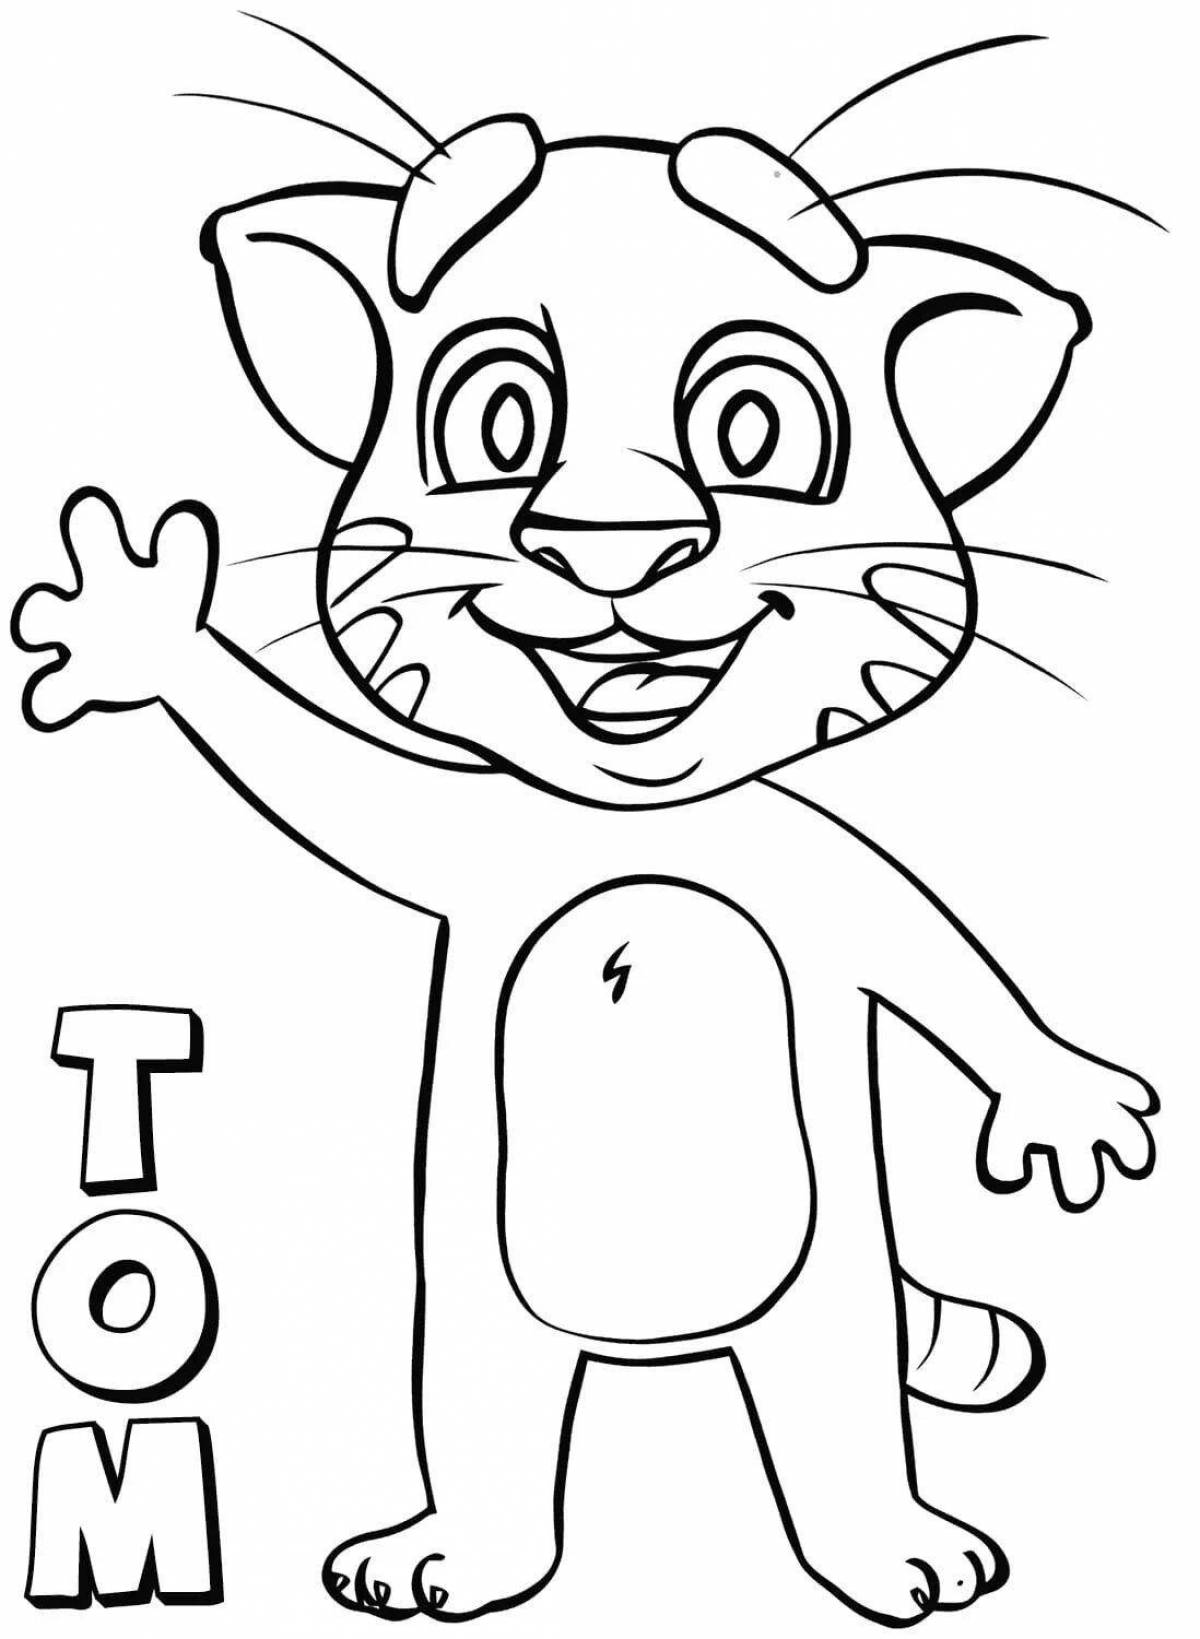 Bright tom and ben coloring pages